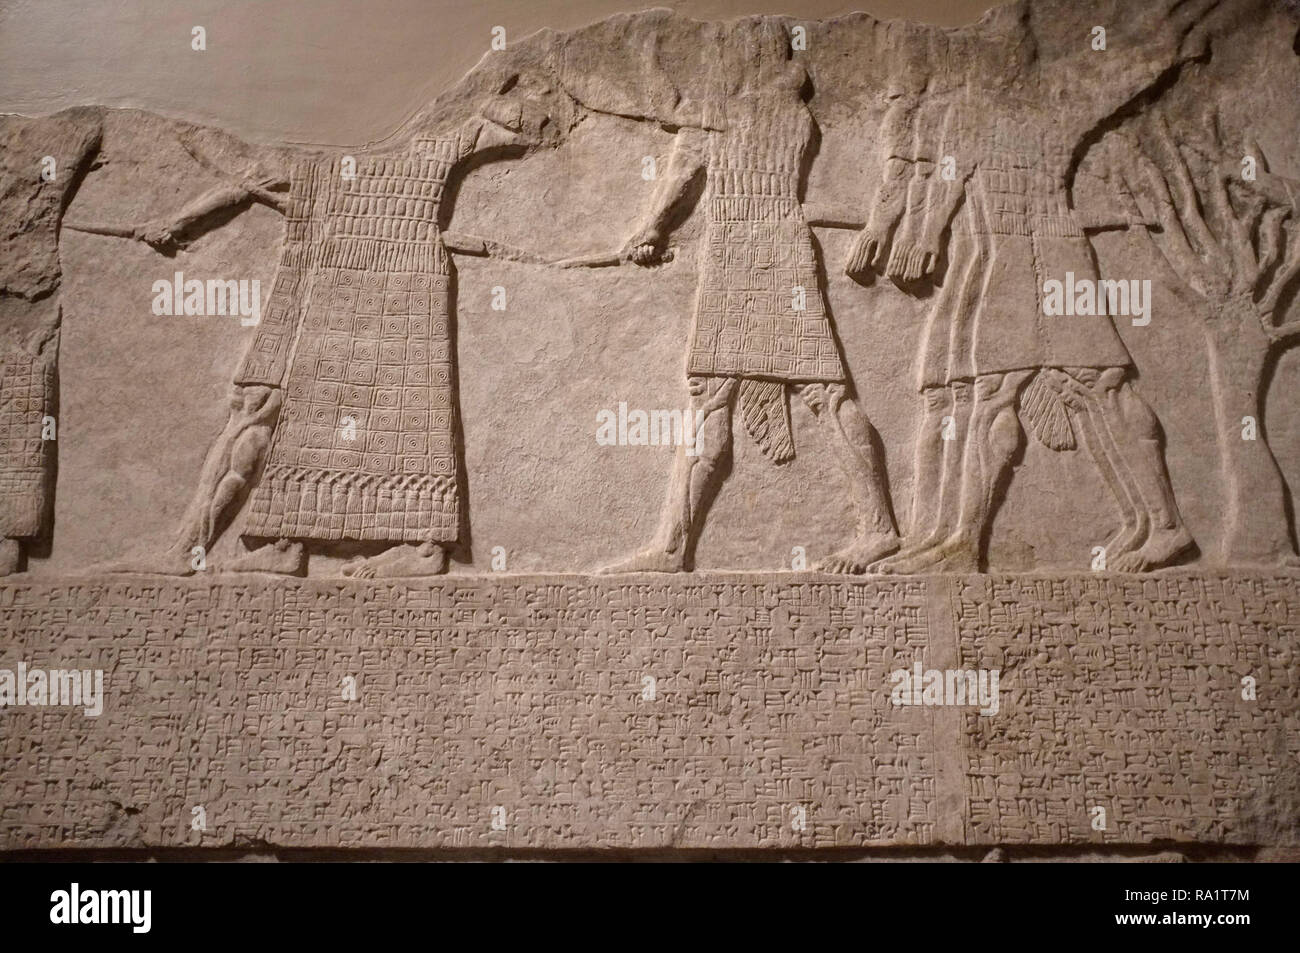 Ancient Sumerian artefacts at the british museum, London, showing cuneiform text and writing from the ancient assyrian region now iraq. Stock Photo